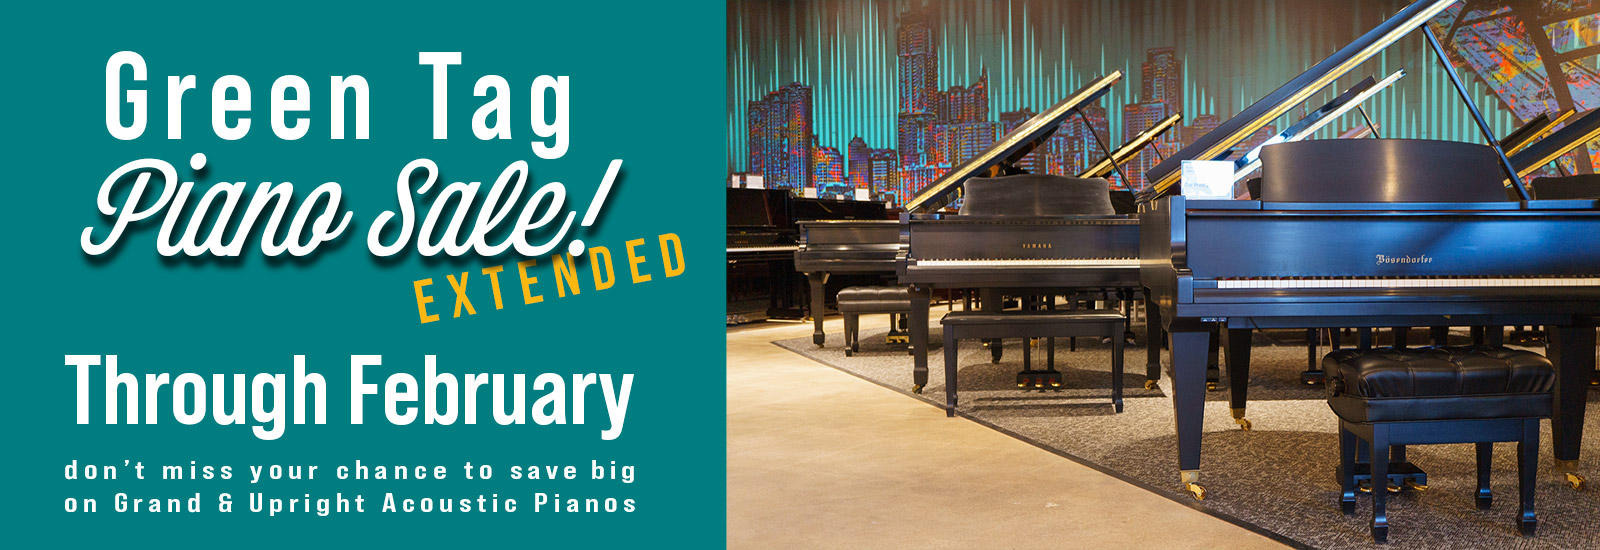 presidents day piano sale